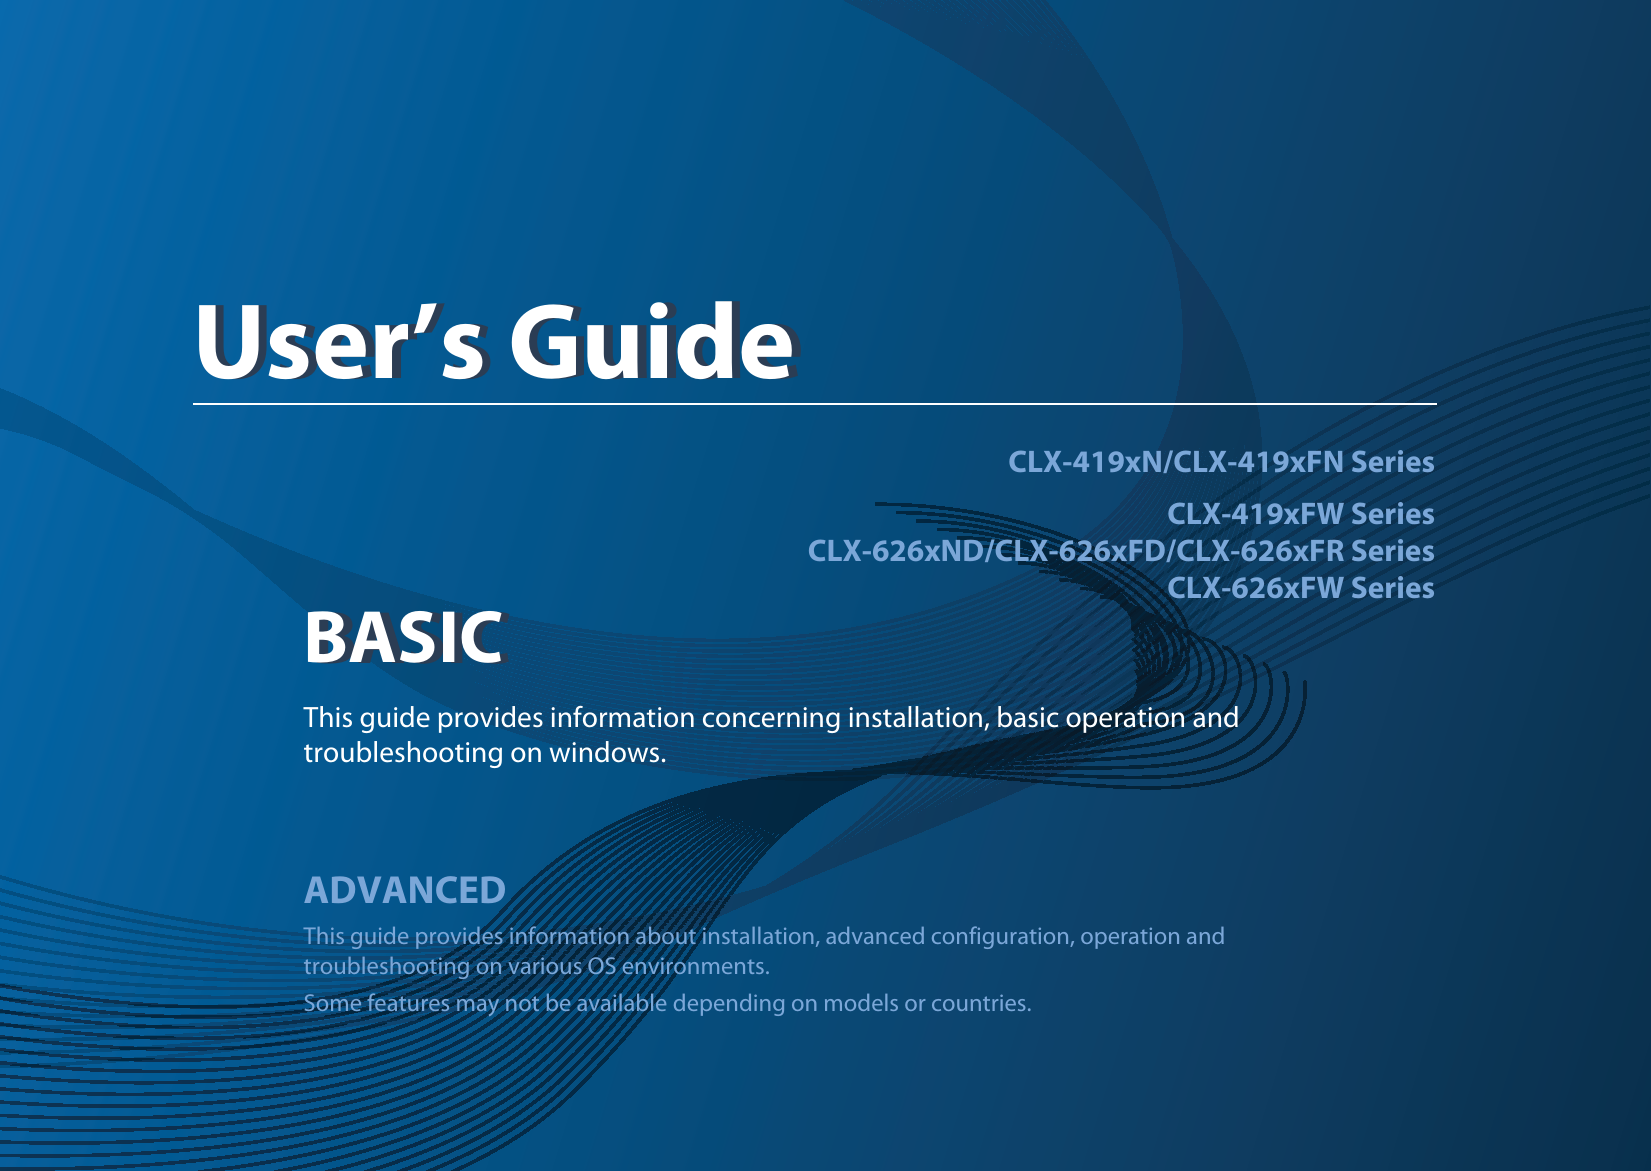 BASICUser’s GuideCLX-419xN/CLX-419xFN SeriesCLX-419xFW SeriesCLX-626xND/CLX-626xFD/CLX-626xFR SeriesCLX-626xFW SeriesBASICUser’s GuideThis guide provides information concerning installation, basic operation and troubleshooting on windows.ADVANCEDThis guide provides information about installation, advanced configuration, operation and troubleshooting on various OS environments. Some features may not be available depending on models or countries.